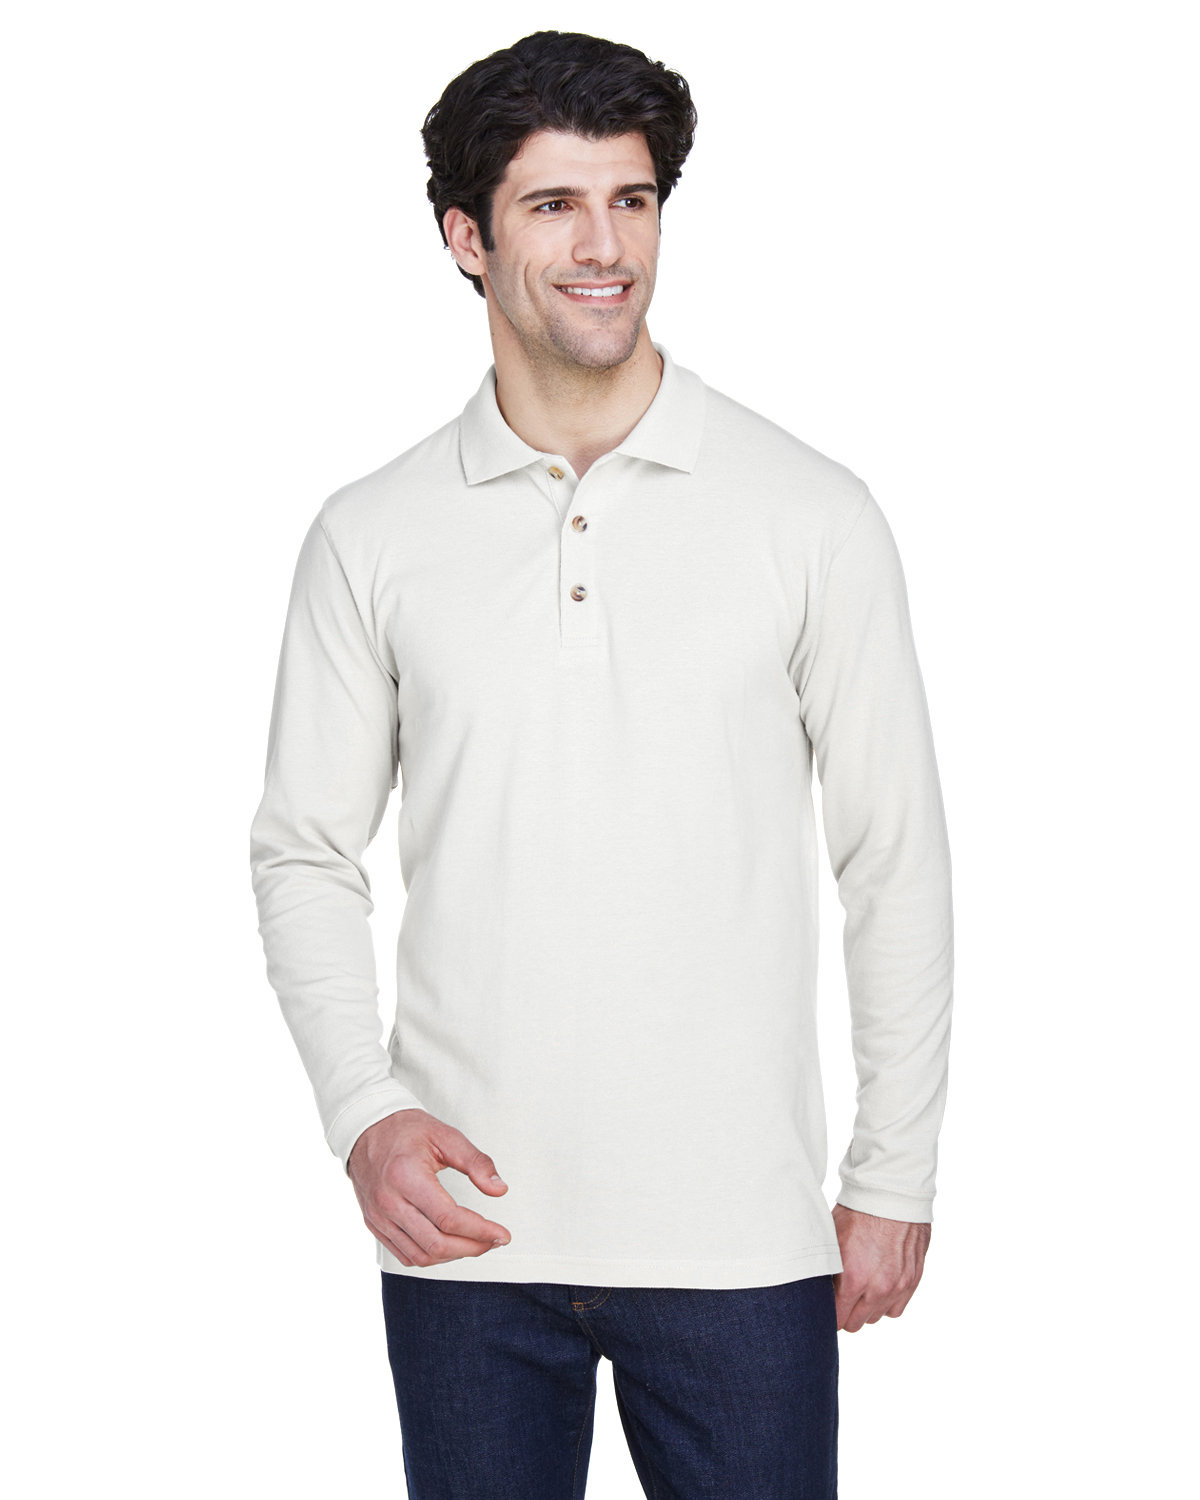 Buy Adult Long-Sleeve Classic Pique Polo - UltraClub Online at Best ...